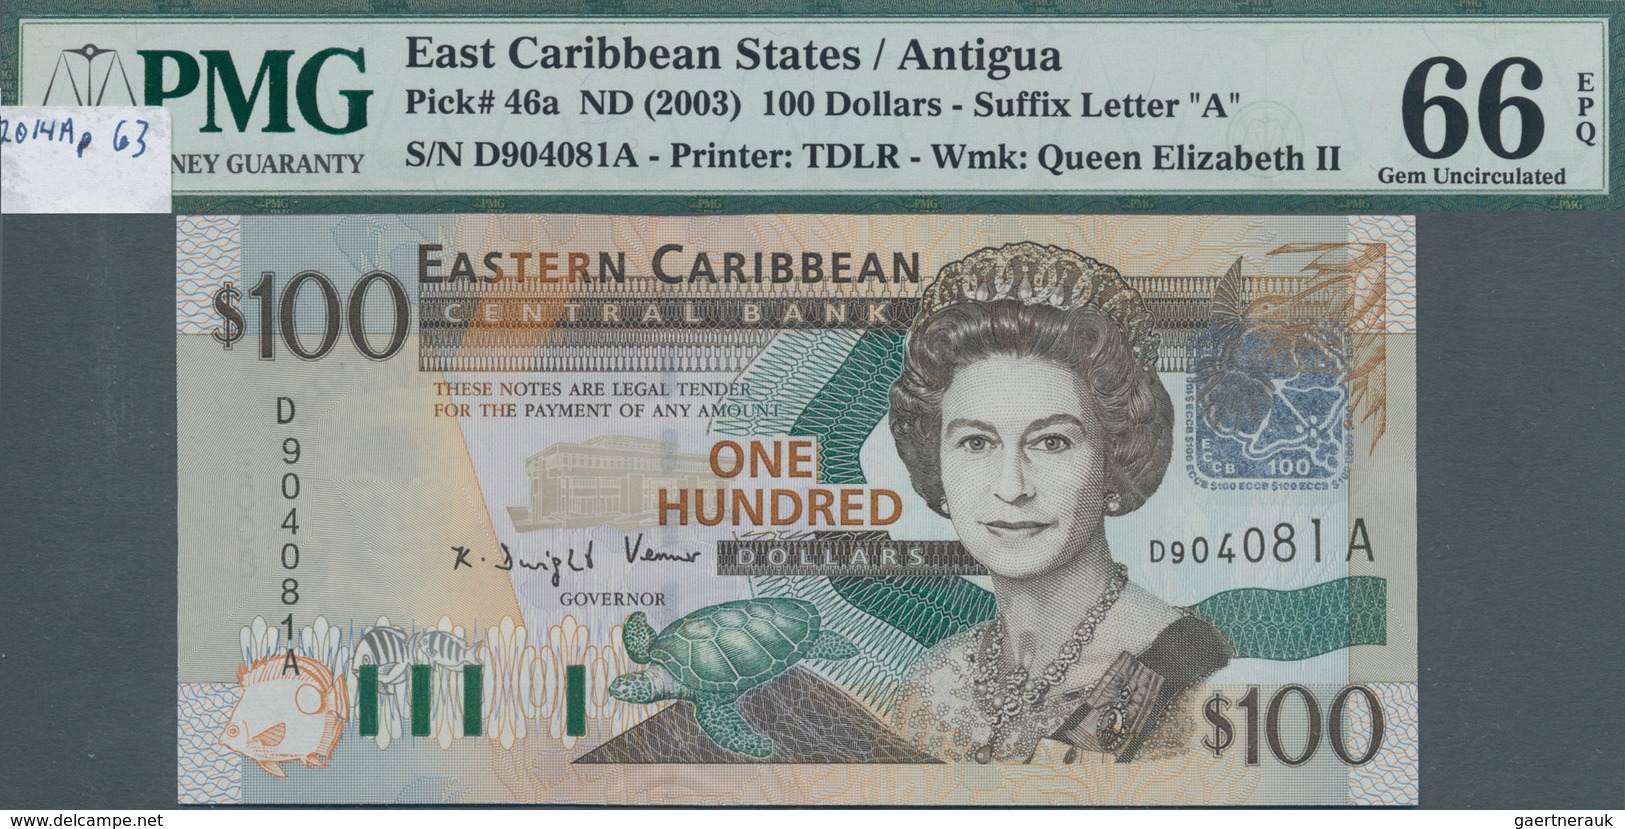 Antigua: Nice group of 4 banknotes 100 Dollars ND(2003), P.46a, all in UNC and all PMG graded 66 Gem